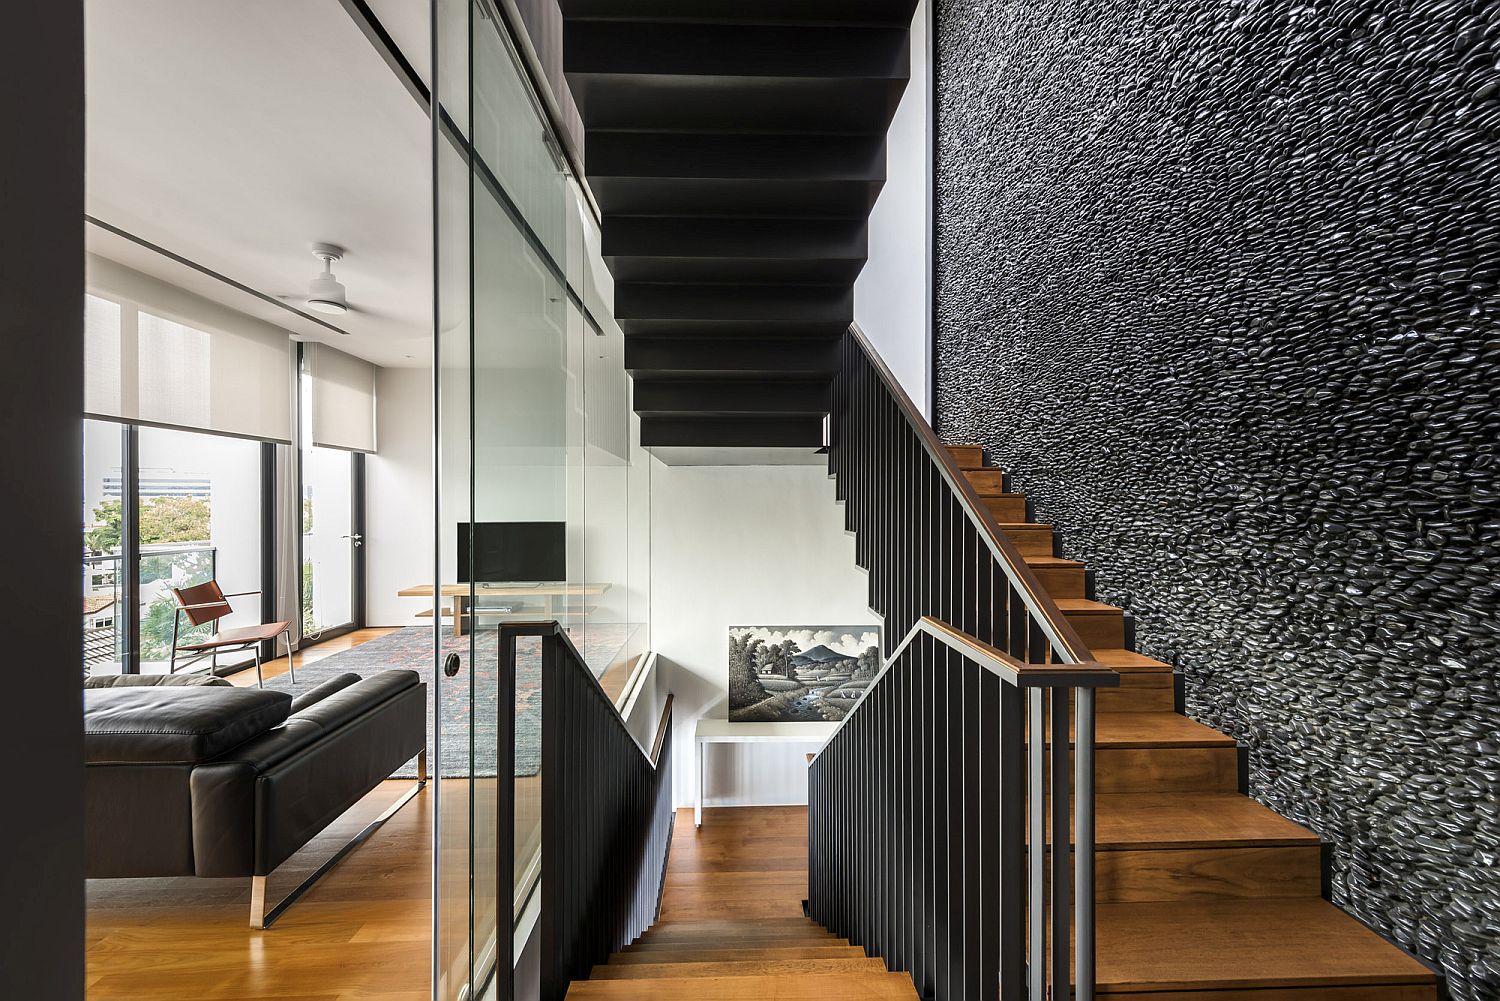 Wood and metal staircase connecting the multiple levels of the contemporary home